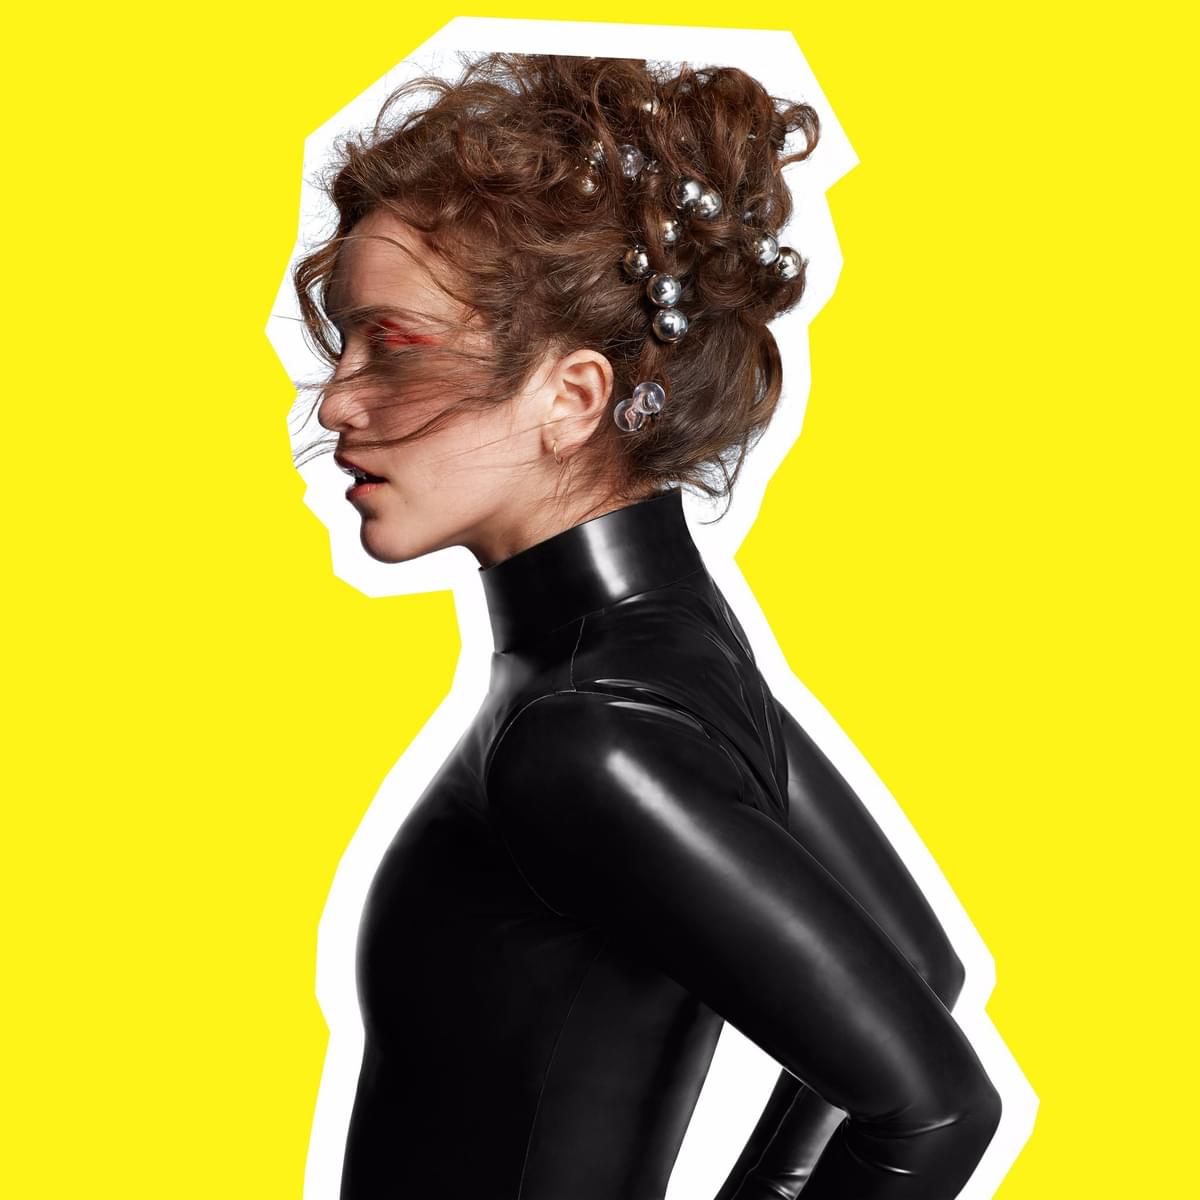 Rae morris someone out there artwork